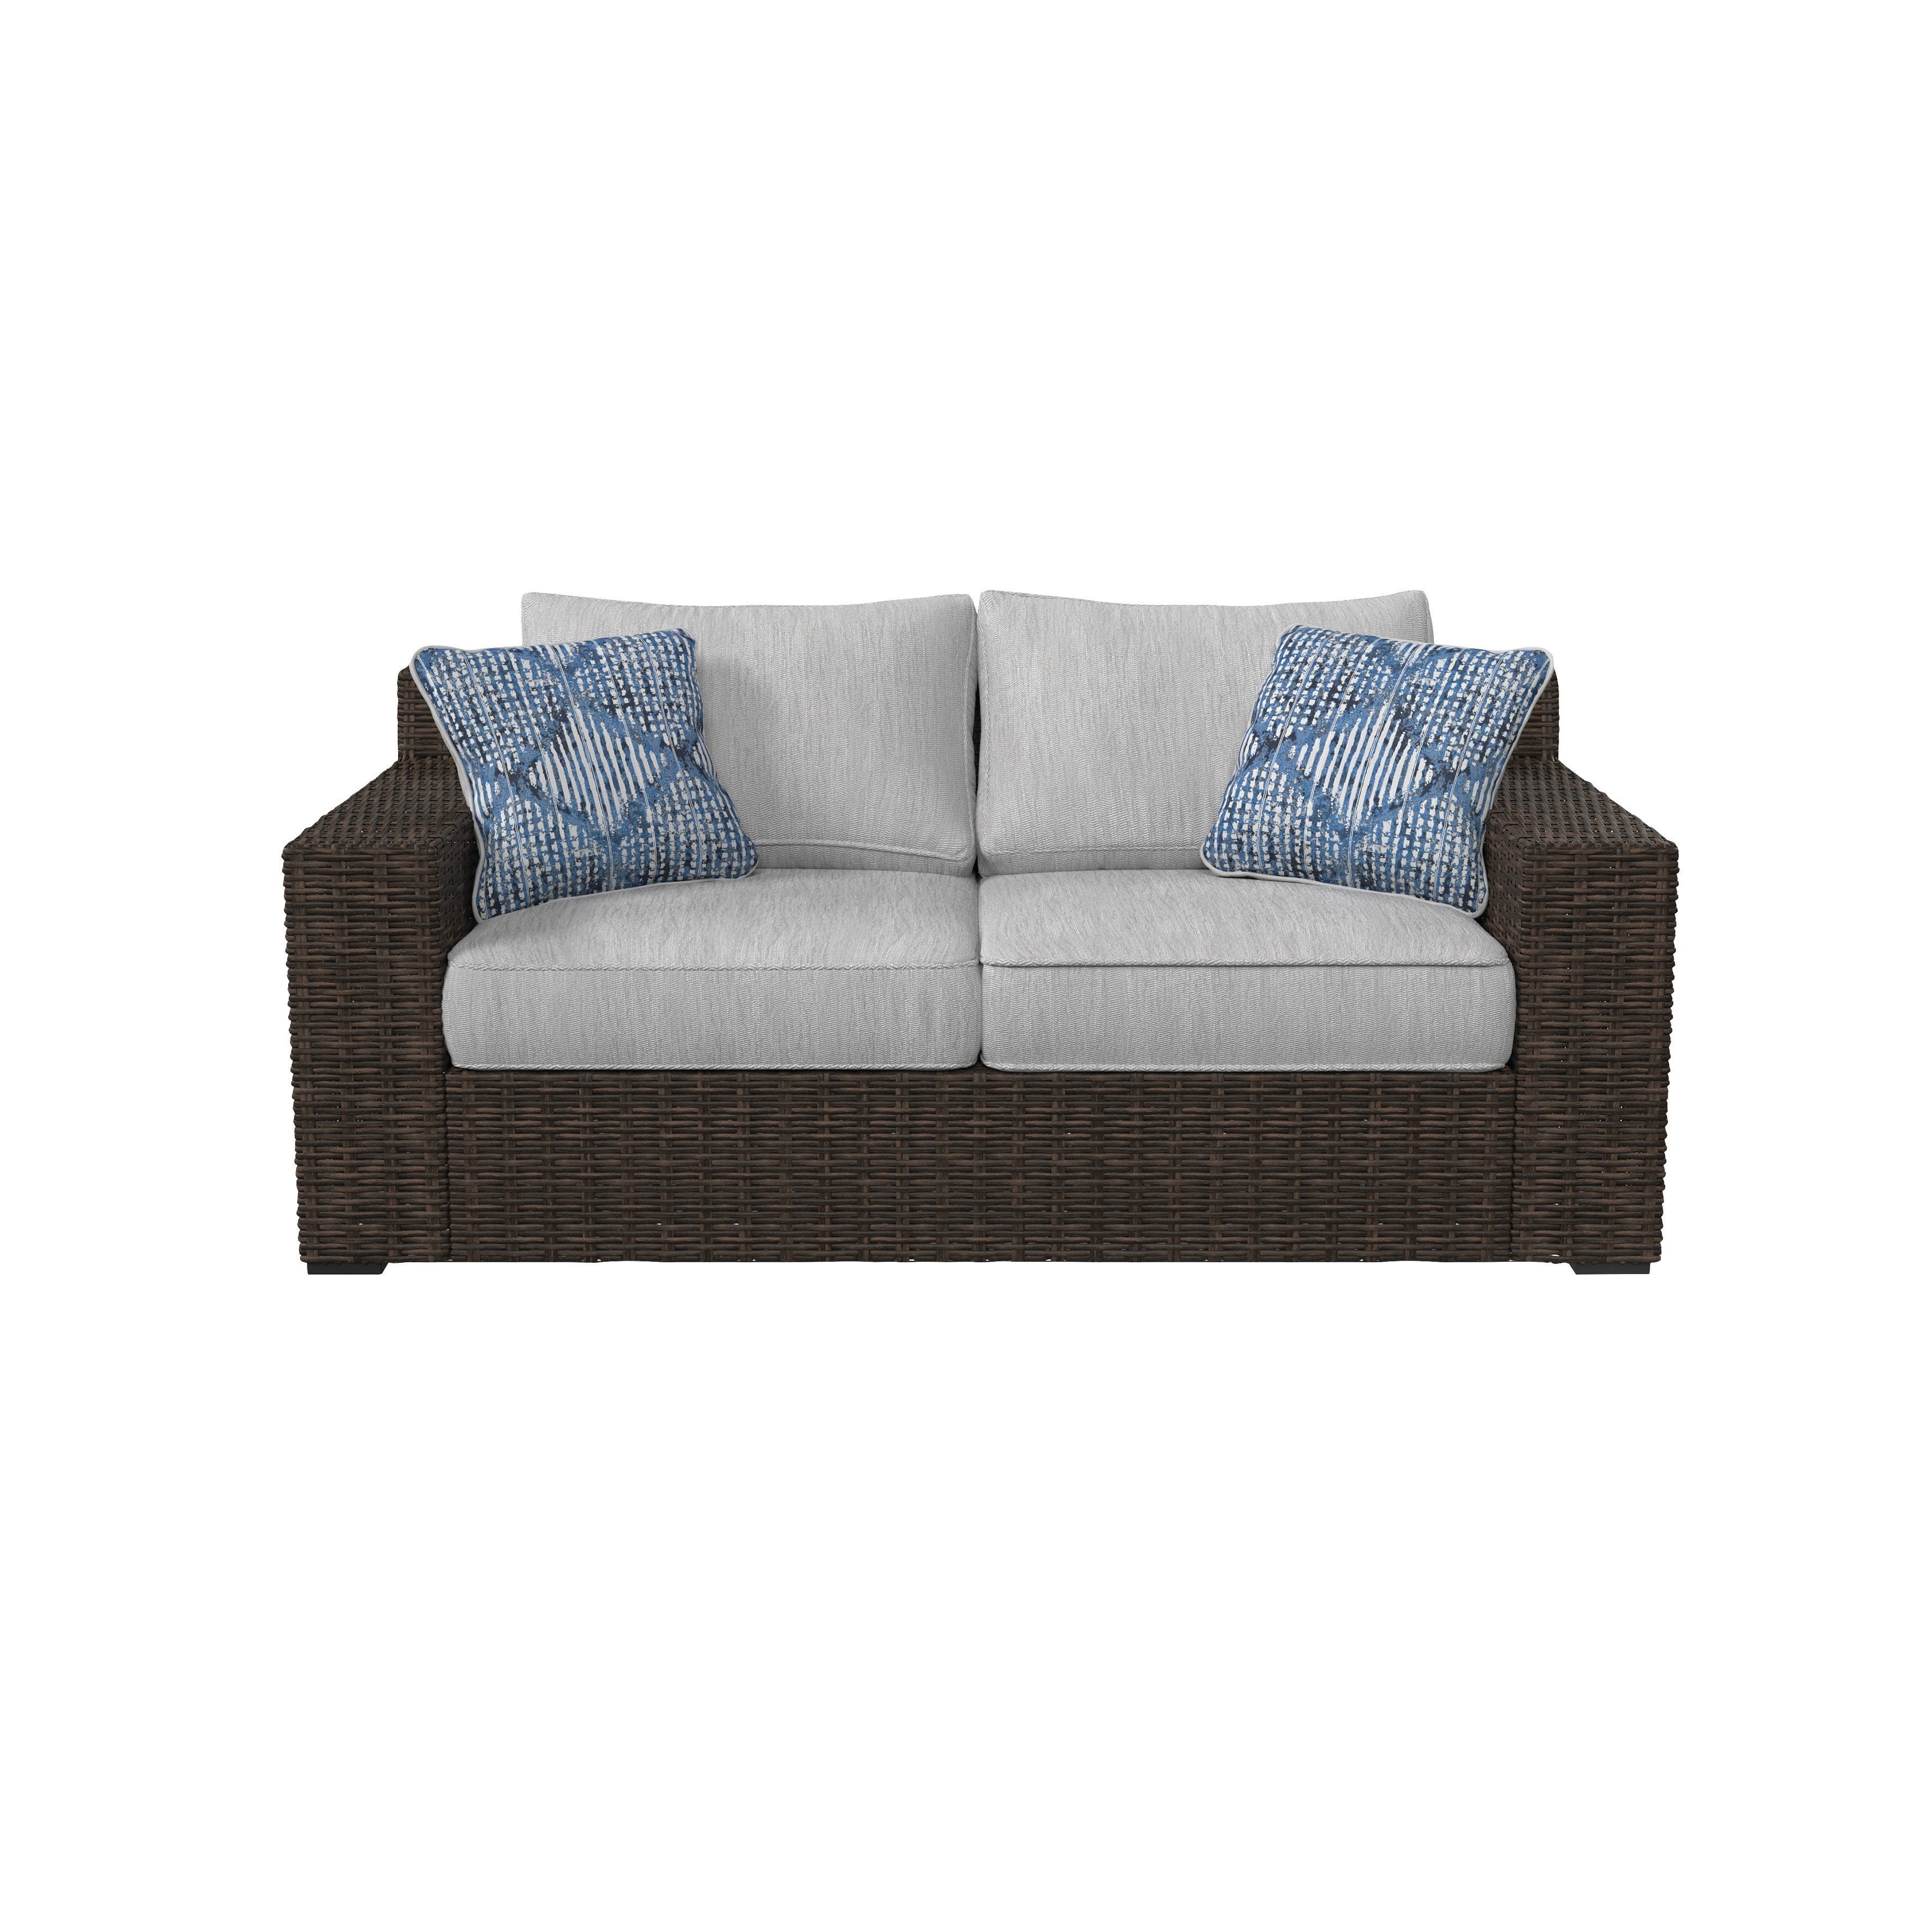 Tripp Loveseats With Cushions Within Most Recently Released Oreland Loveseat With Cushions (View 12 of 20)